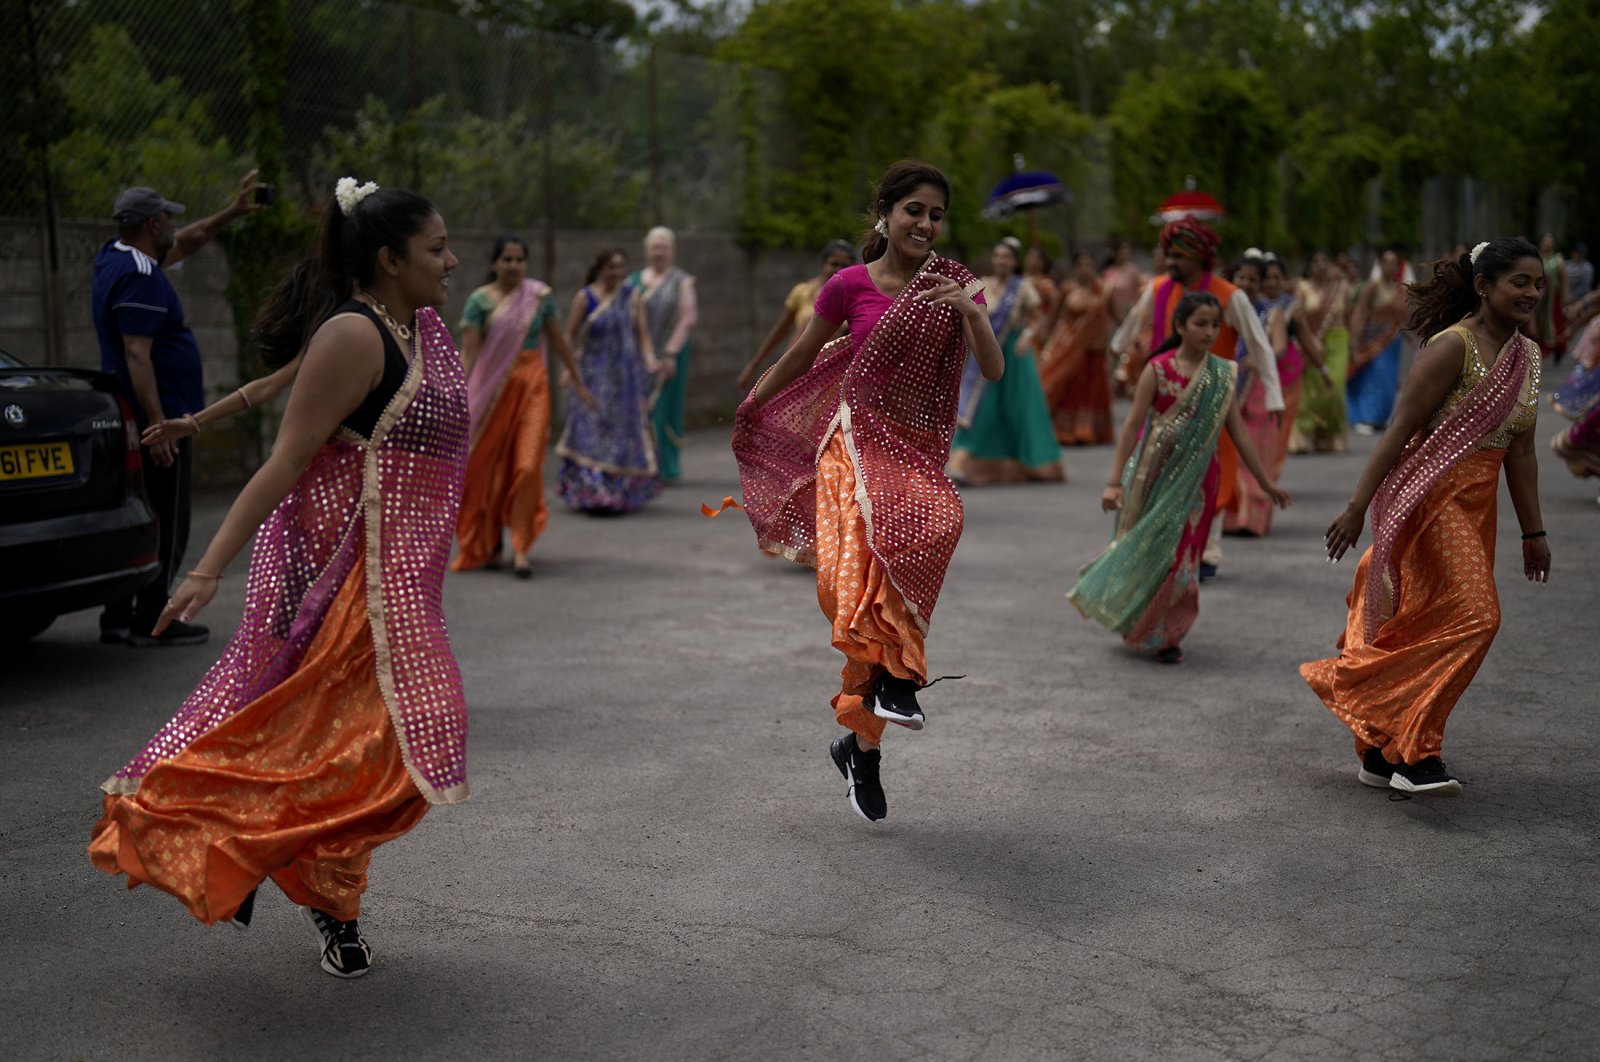 Performers take part in a rehearsal for their upcoming Bollywood-style performance entitled "The Wedding Party," at Northolt High School, in north west London, U.K., May 29, 2022. (AP Photo)